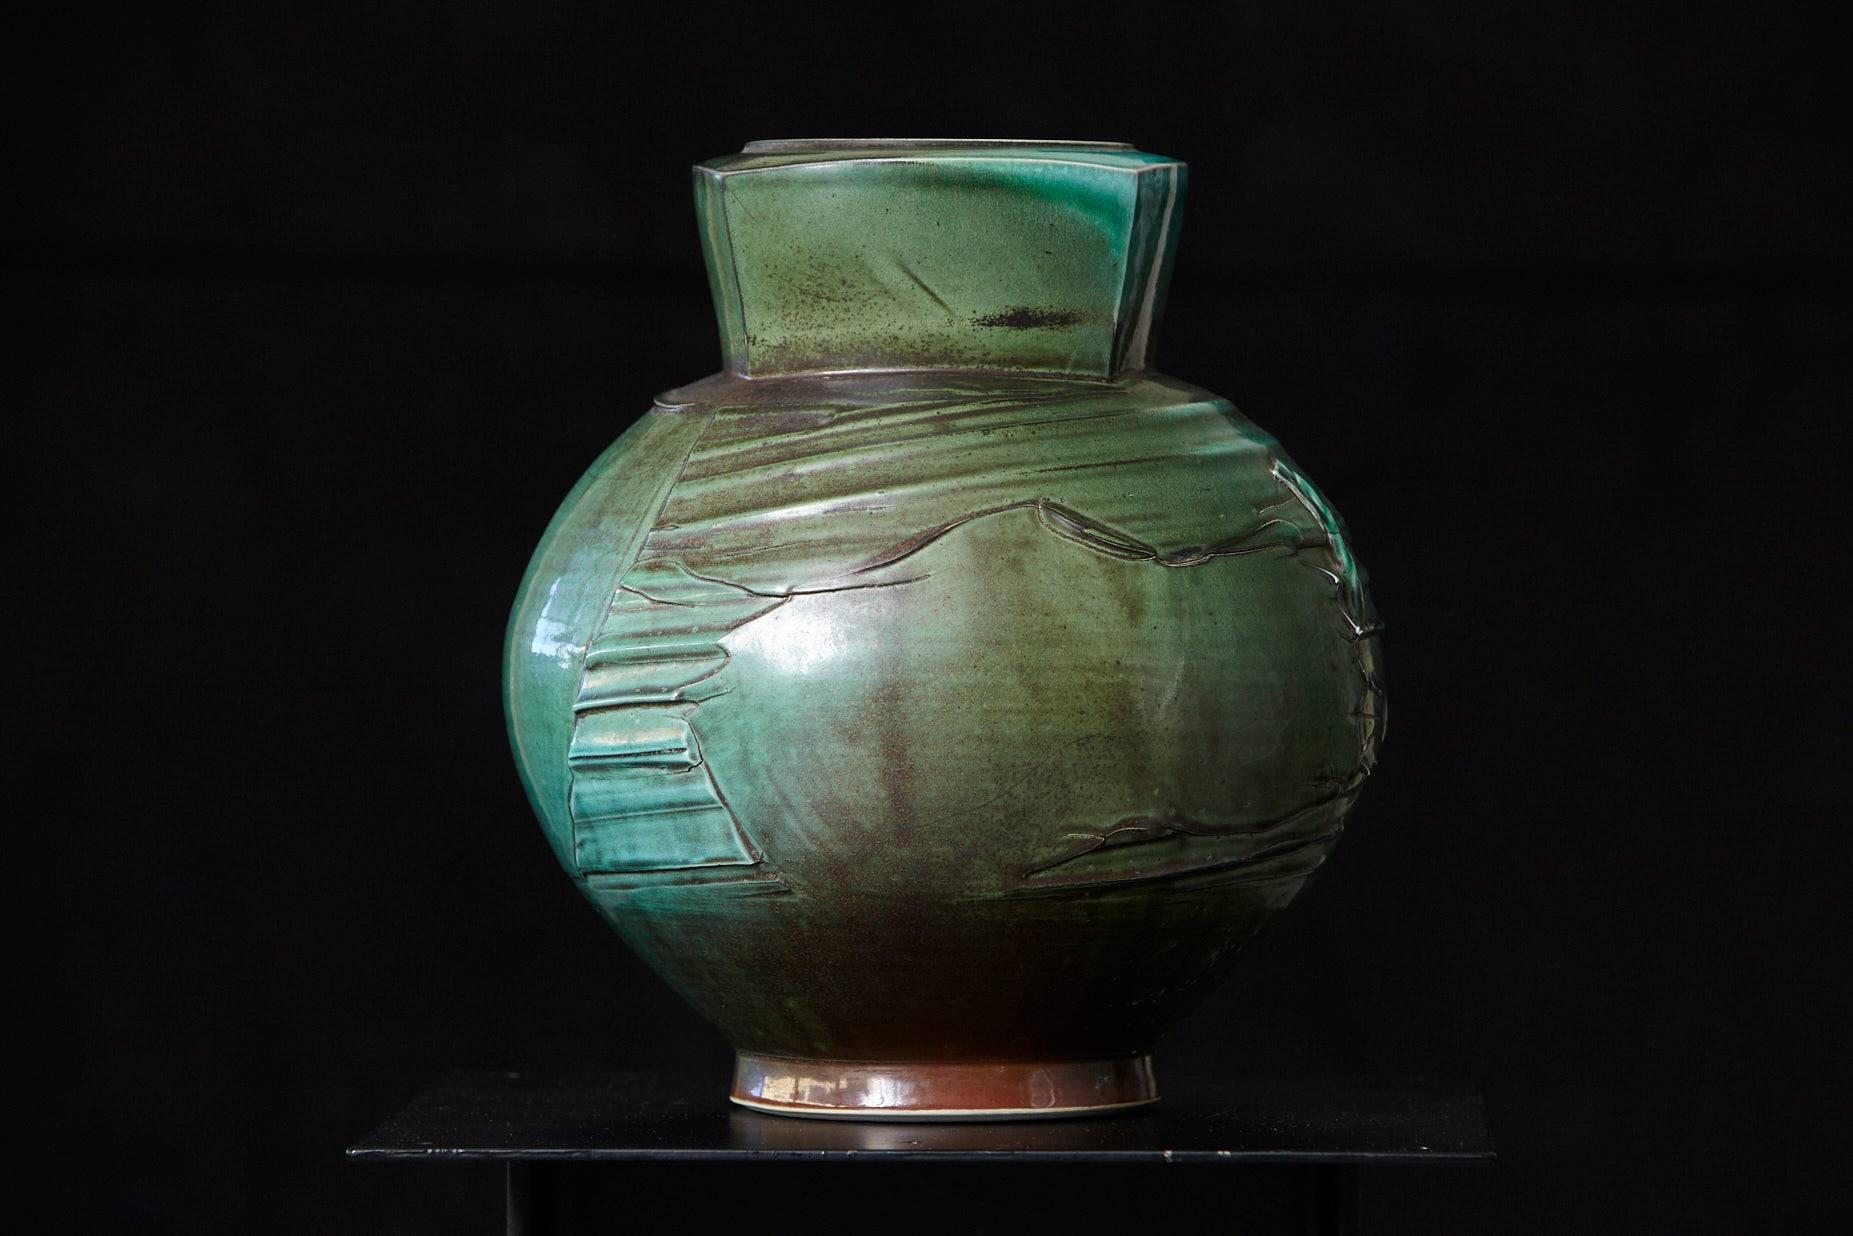 Large, heavy thrown and hand built jar in an exceptional mottled green with a textured surface. Bulbous footed body and paneled neck. Signed on the bottom.
Opening 4.5 in

Chris Staley one of the foremost contemporary American potters, Head of